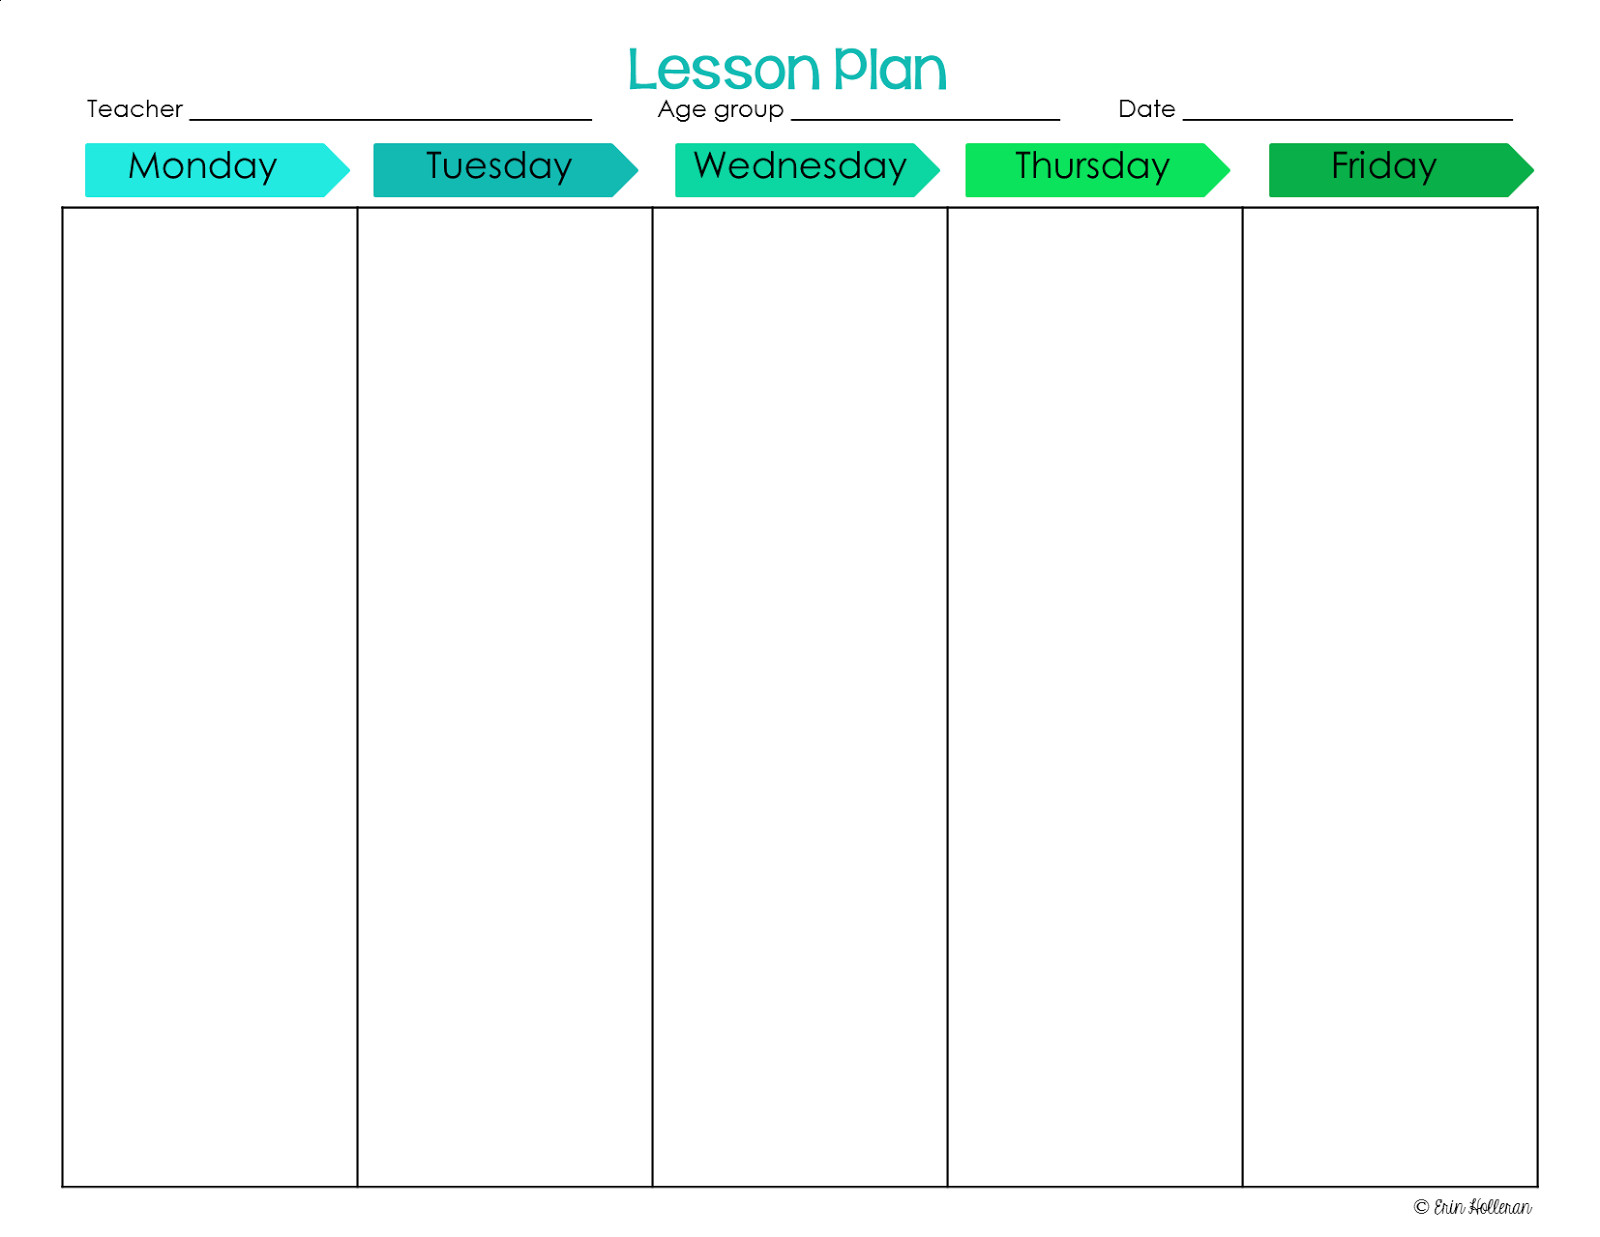 Lesson Plans that Work Preschool Ponderings Make Your Lesson Plans Work for You